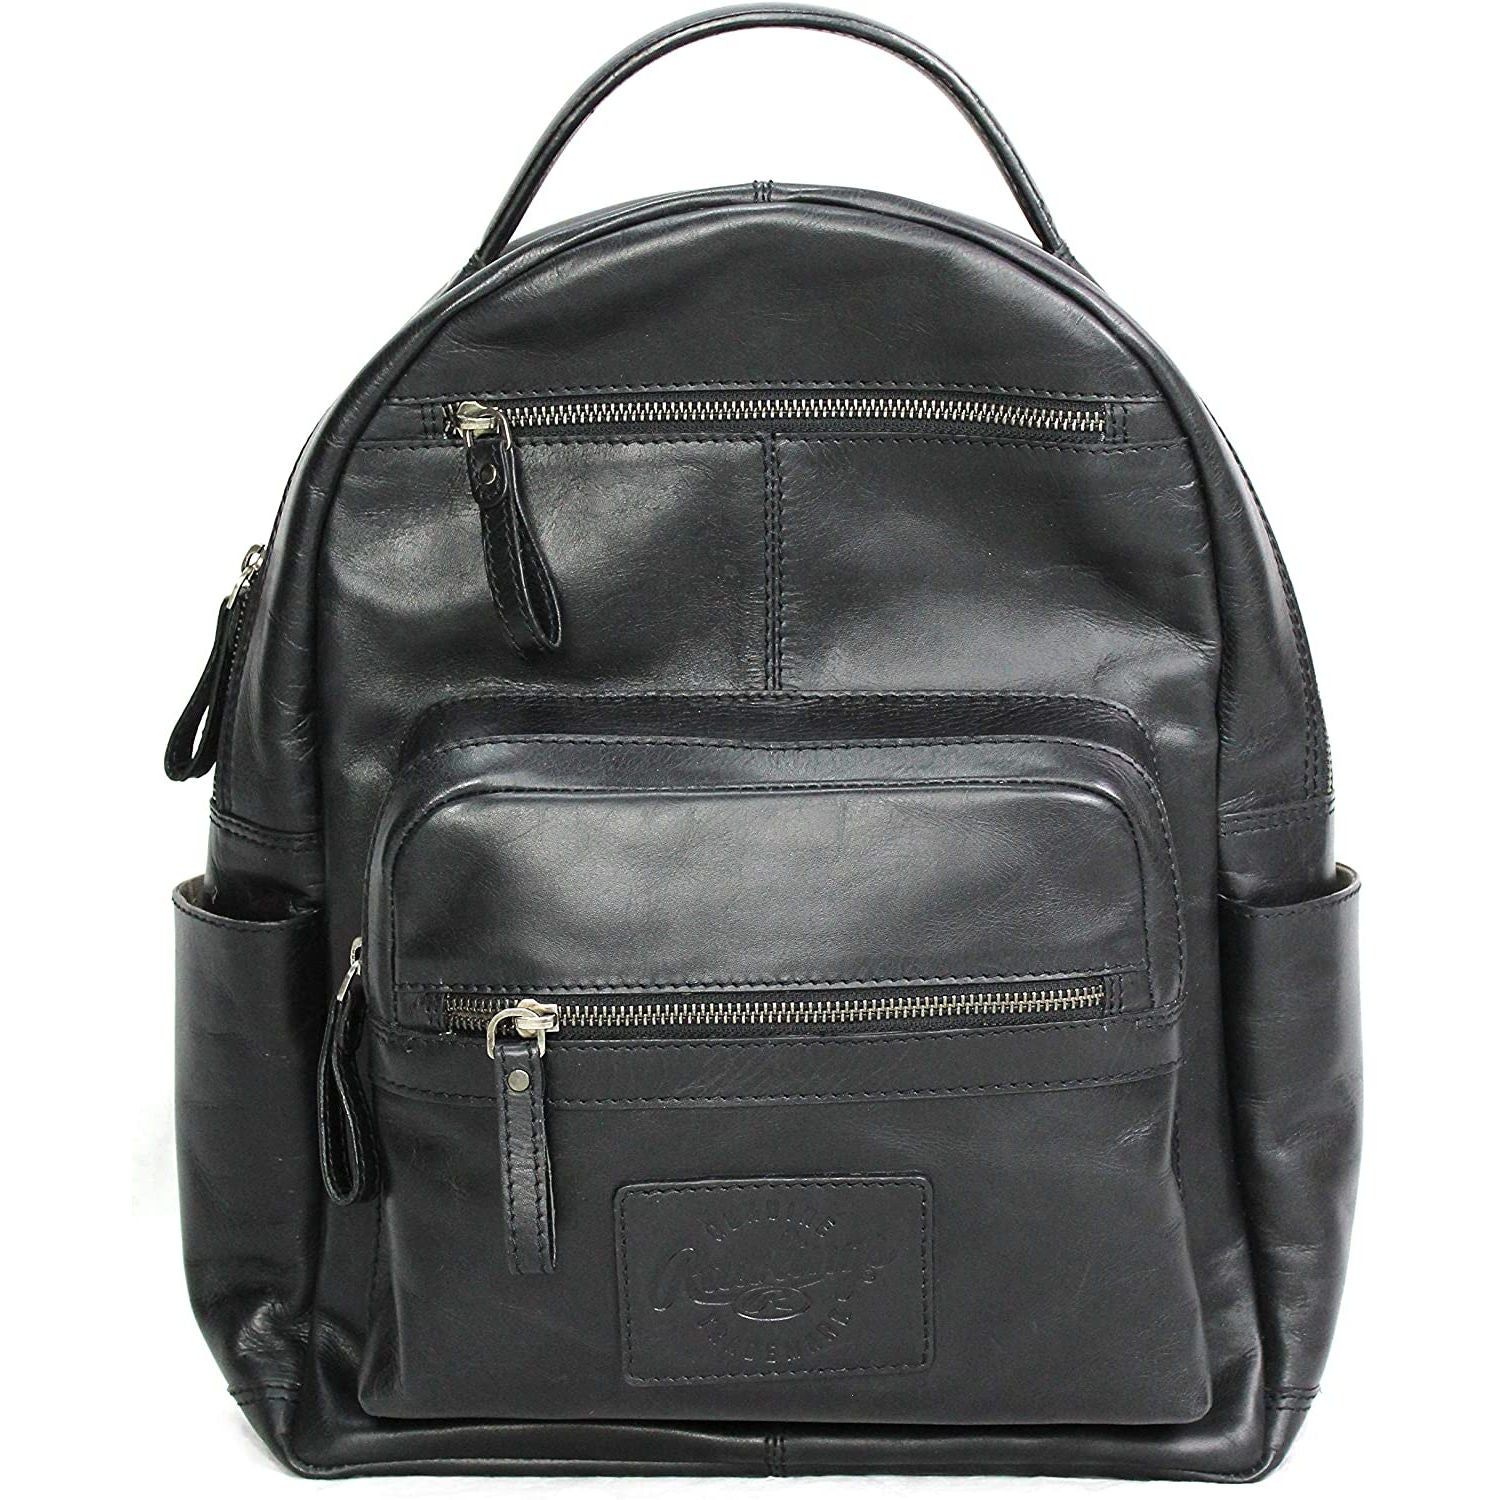 Rawlings Heritage Collection Leather Backpack 15" Black.